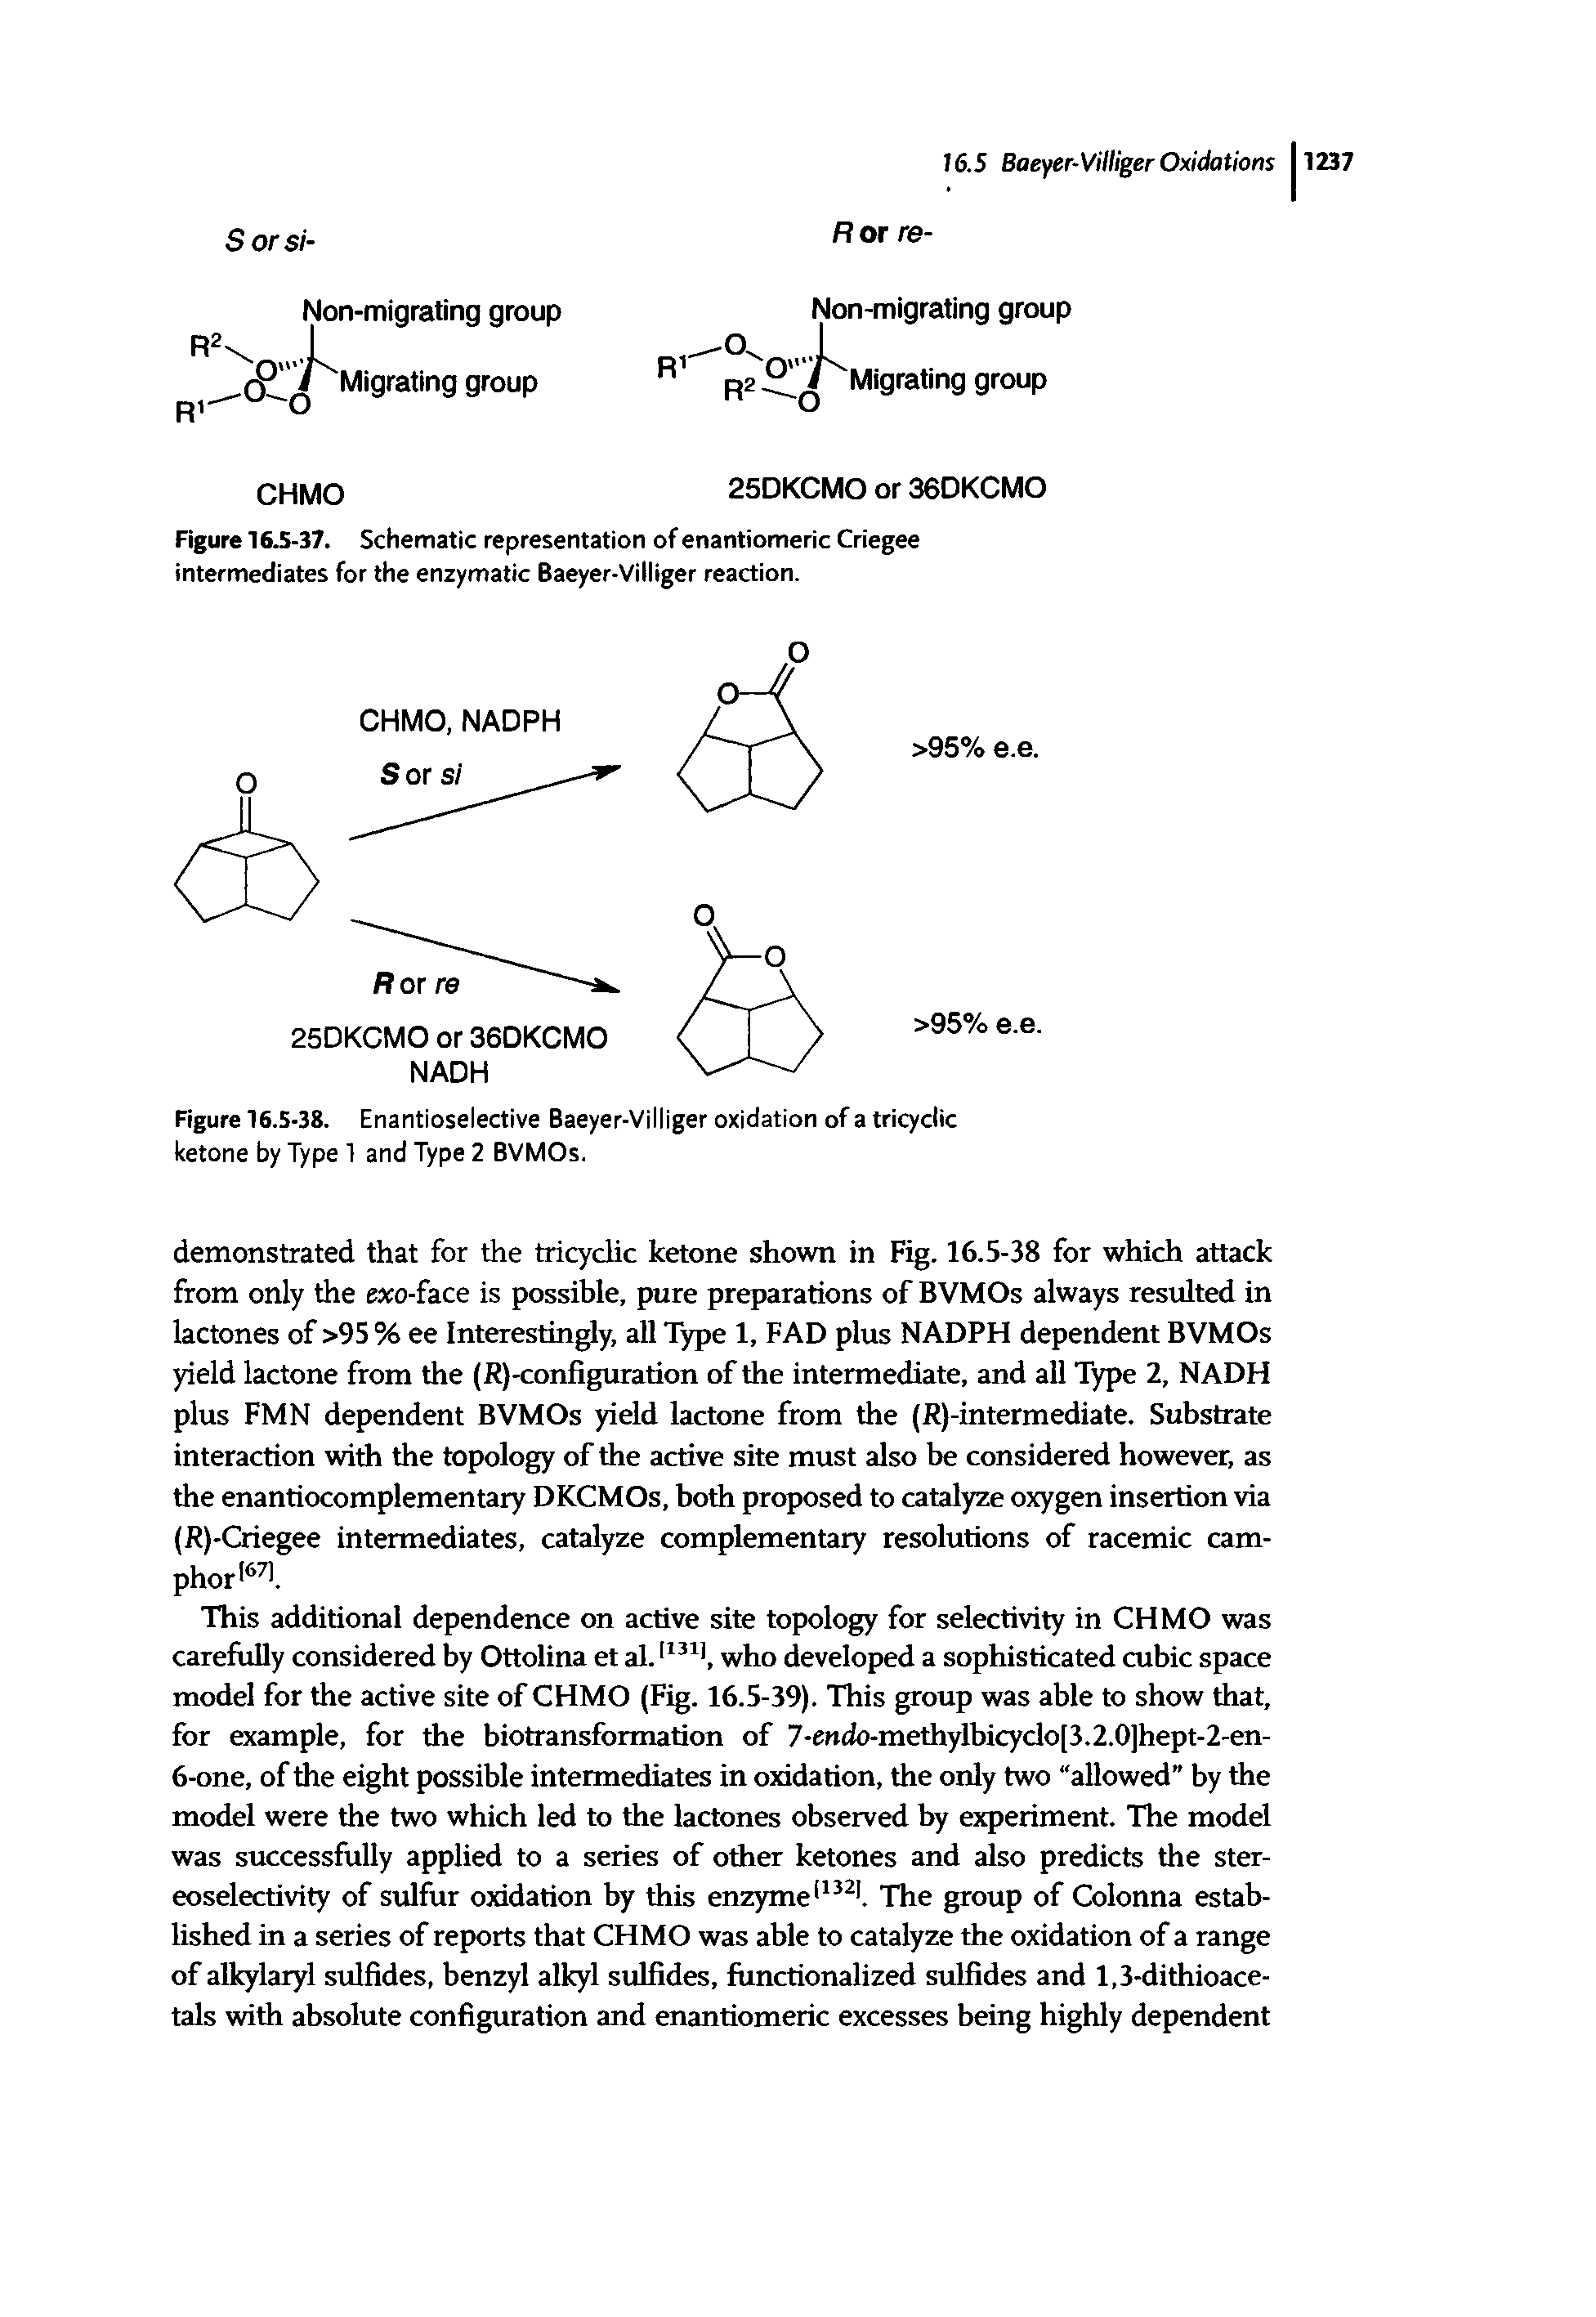 Figure 16.5-38. Enantioselective Baeyer-Villiger oxidation of a tricyclic ketone by Type 1 and Type 2 BVMOs.